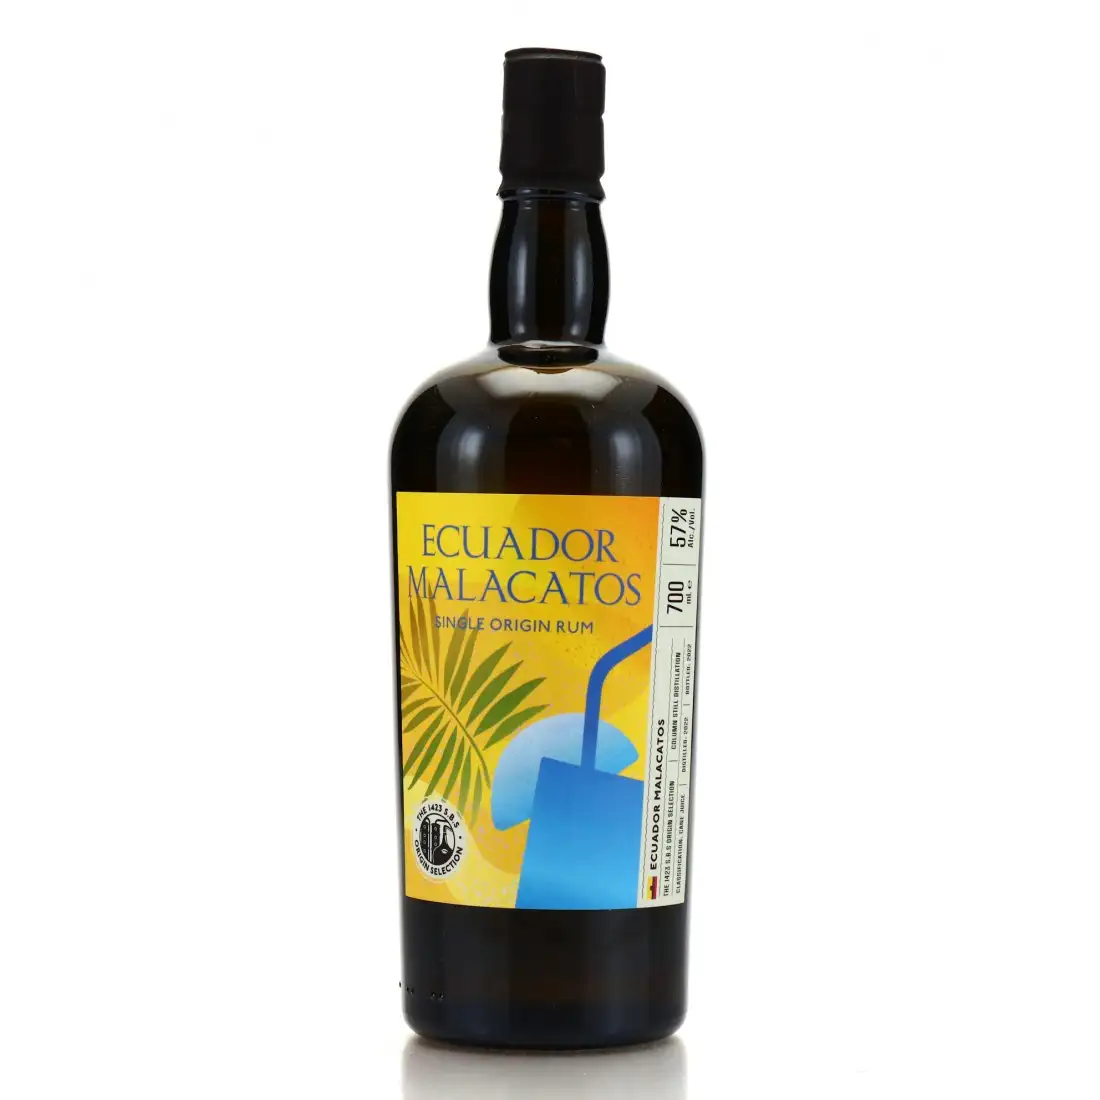 Image of the front of the bottle of the rum S.B.S Ecuador Malacatos